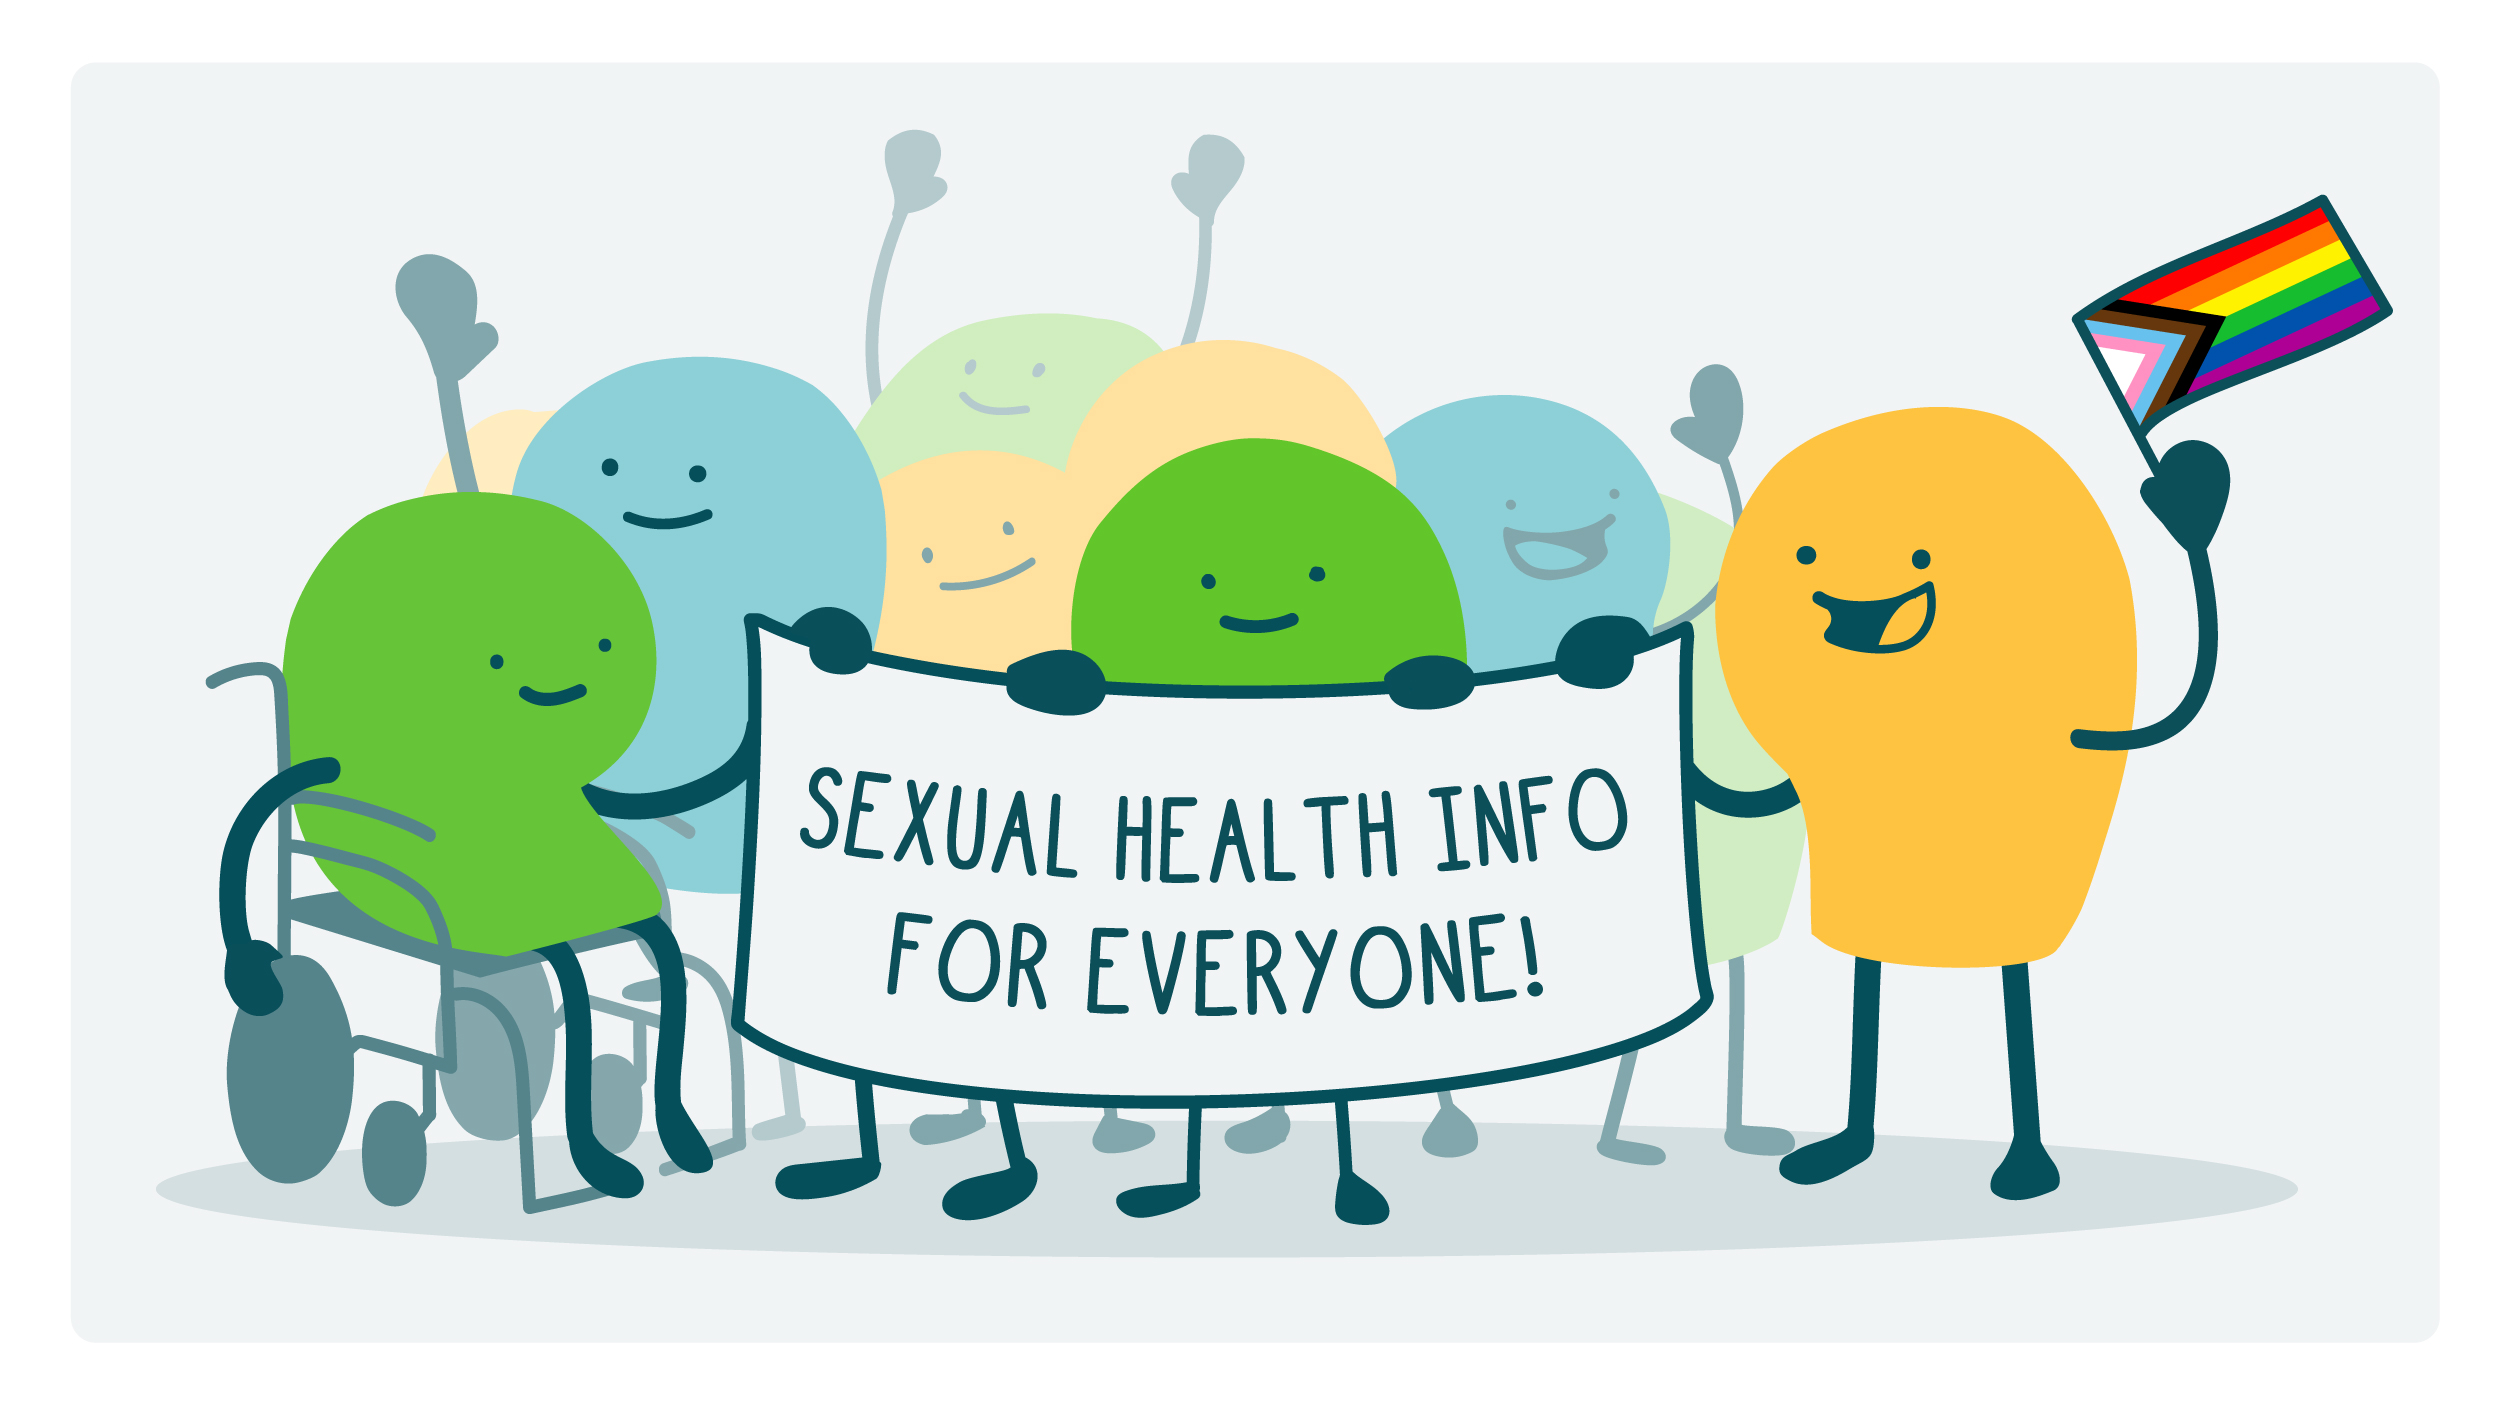 A group of doodles, including a doodle who’s using a wheelchair and a doodle with a Pride flag, hold a banner that says “Sexual health info for everyone!"